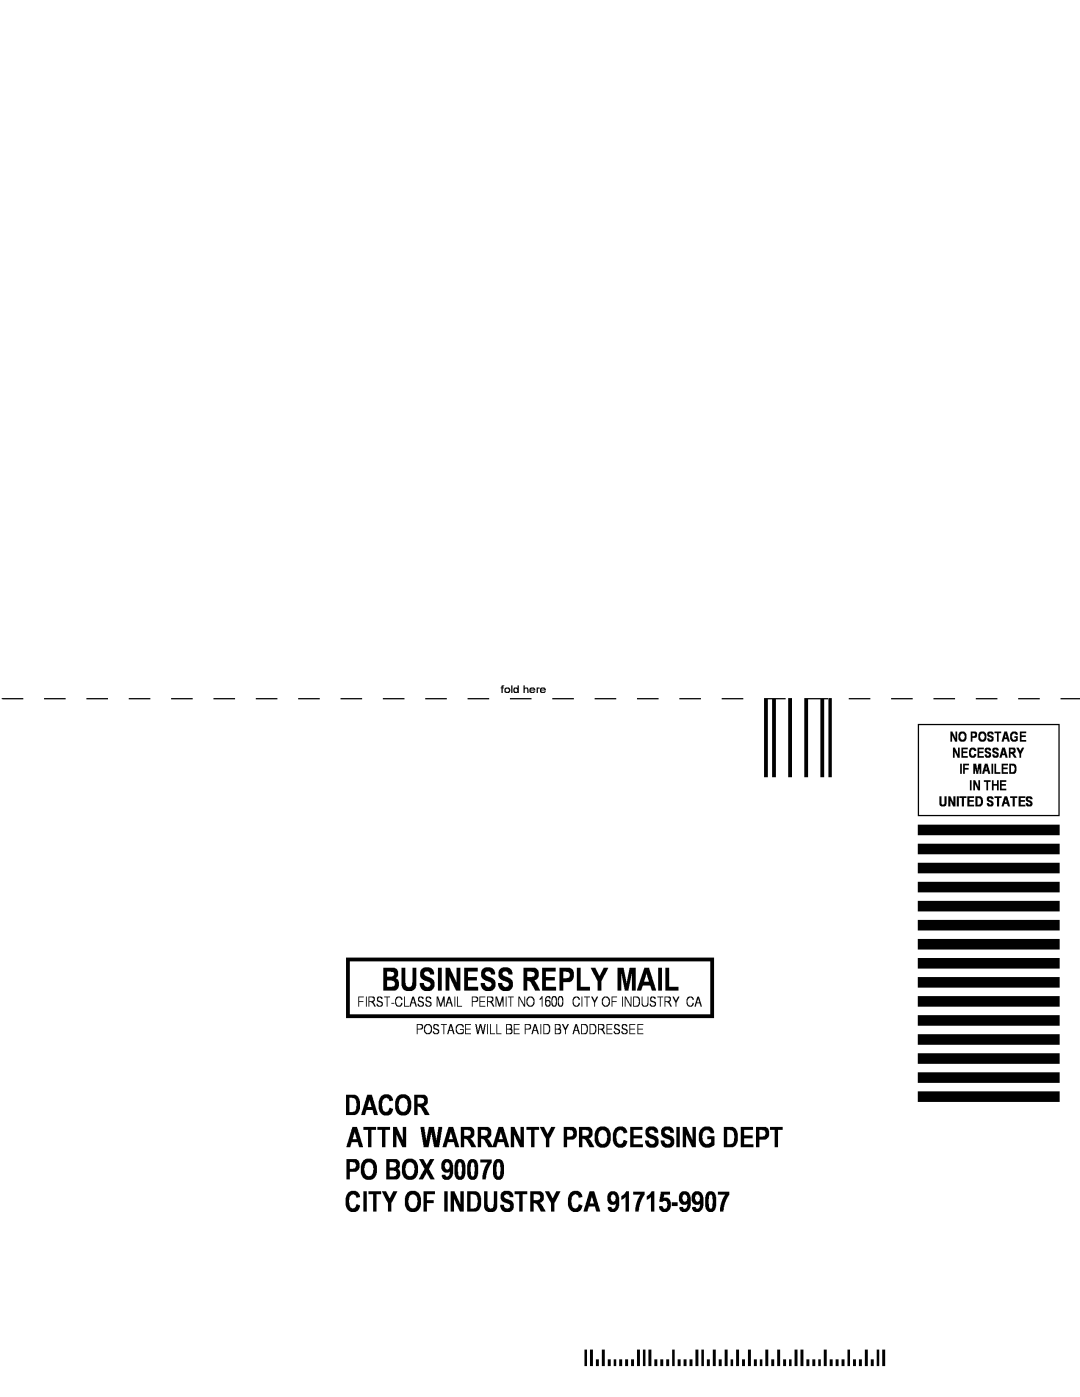 Sears SGM466, SGM304 Business Reply Mail, Dacor Attn Warranty Processing Dept Po Box, City Of Industry Ca, United States 